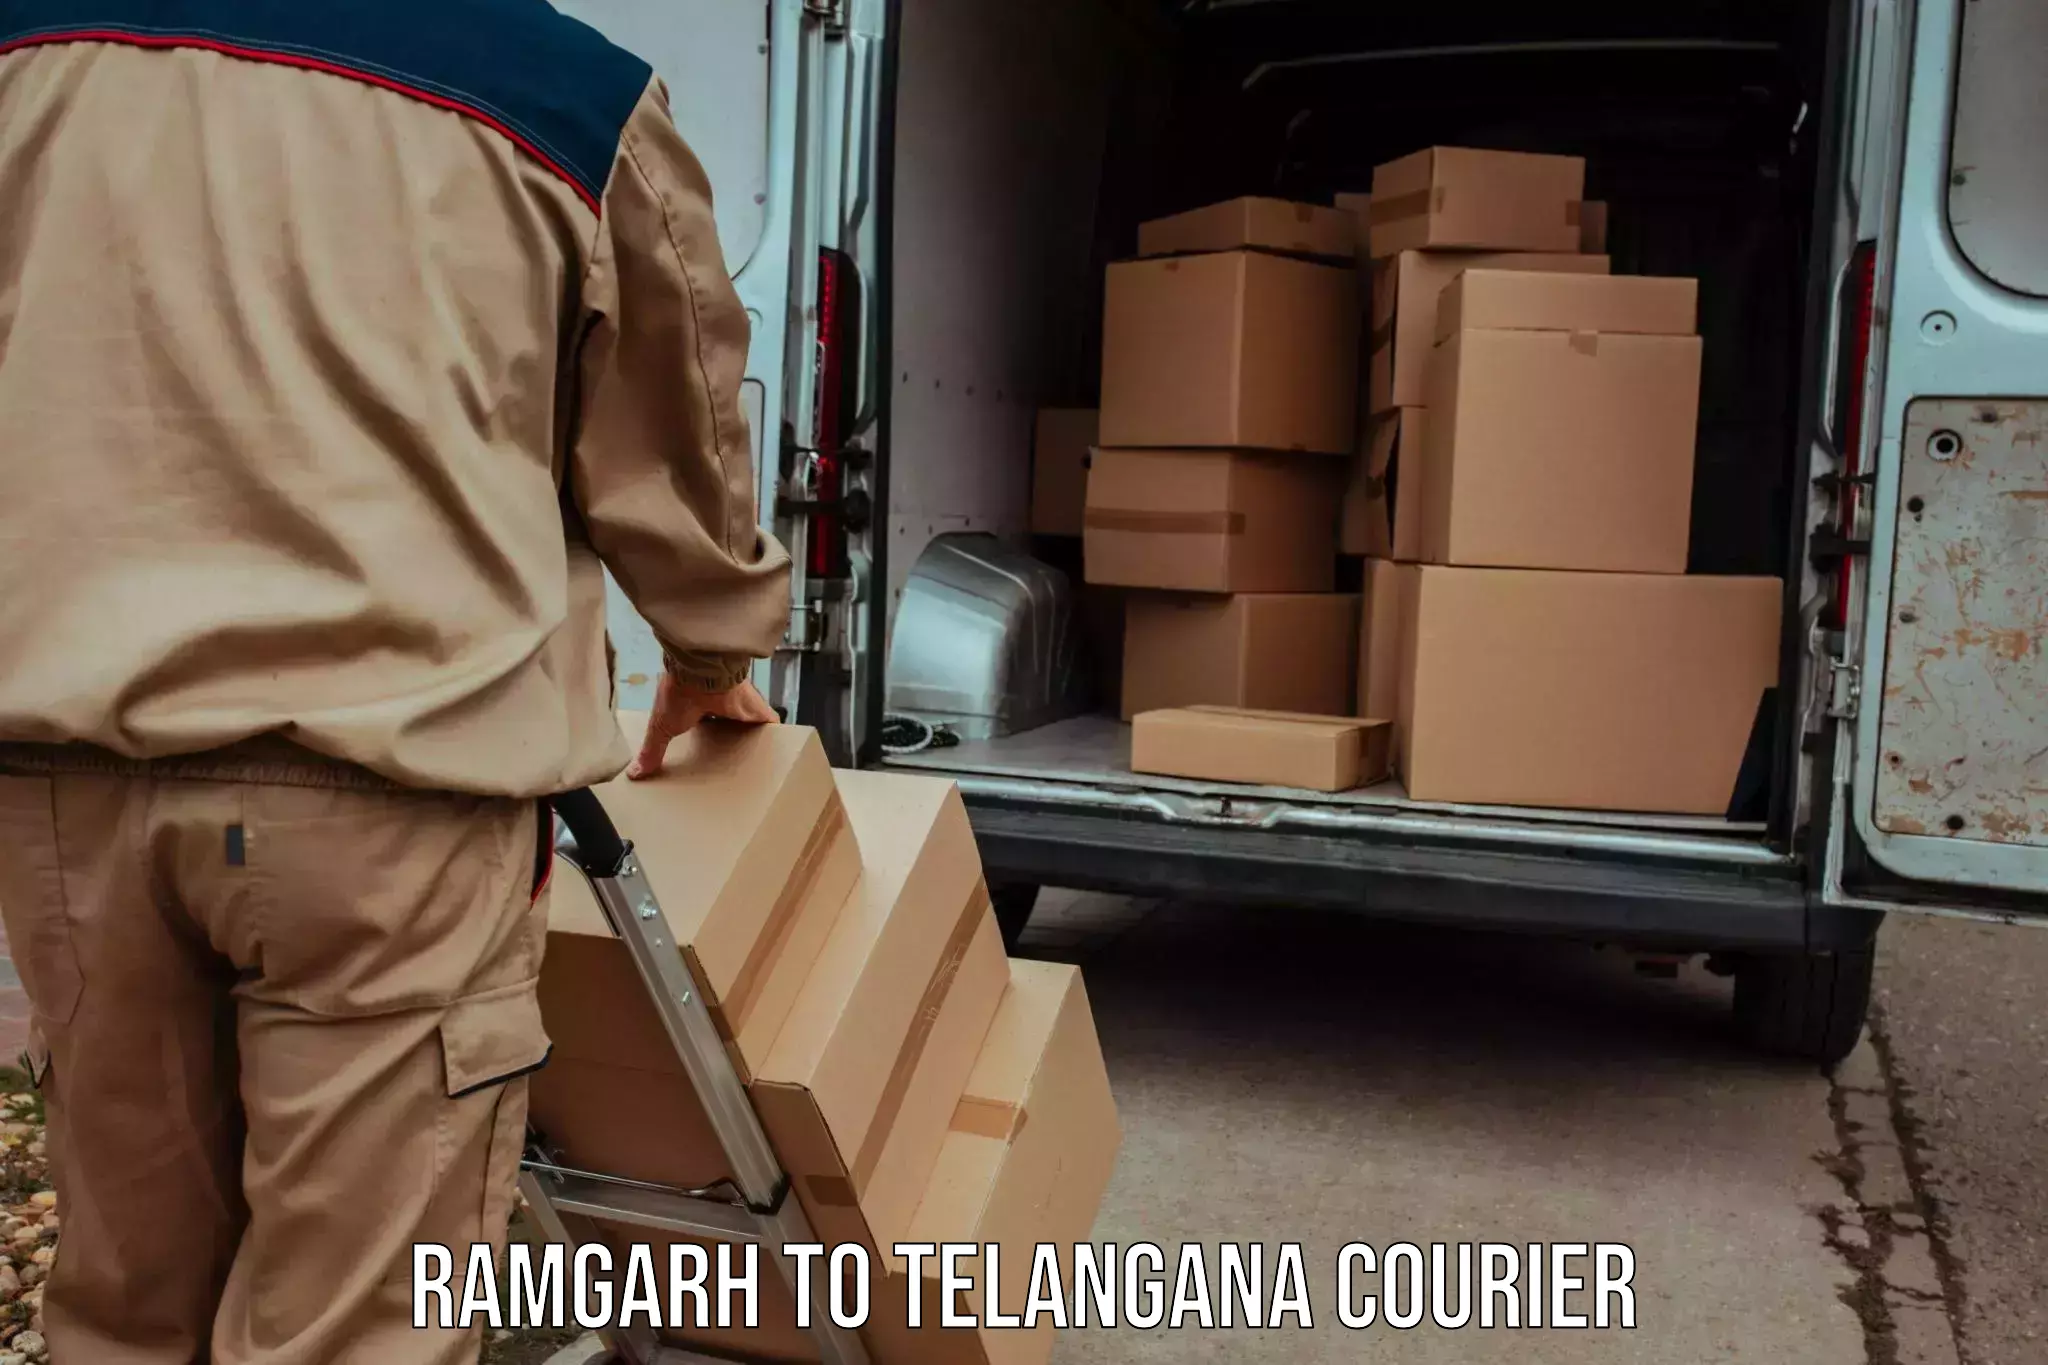 24/7 courier service Ramgarh to Manopad